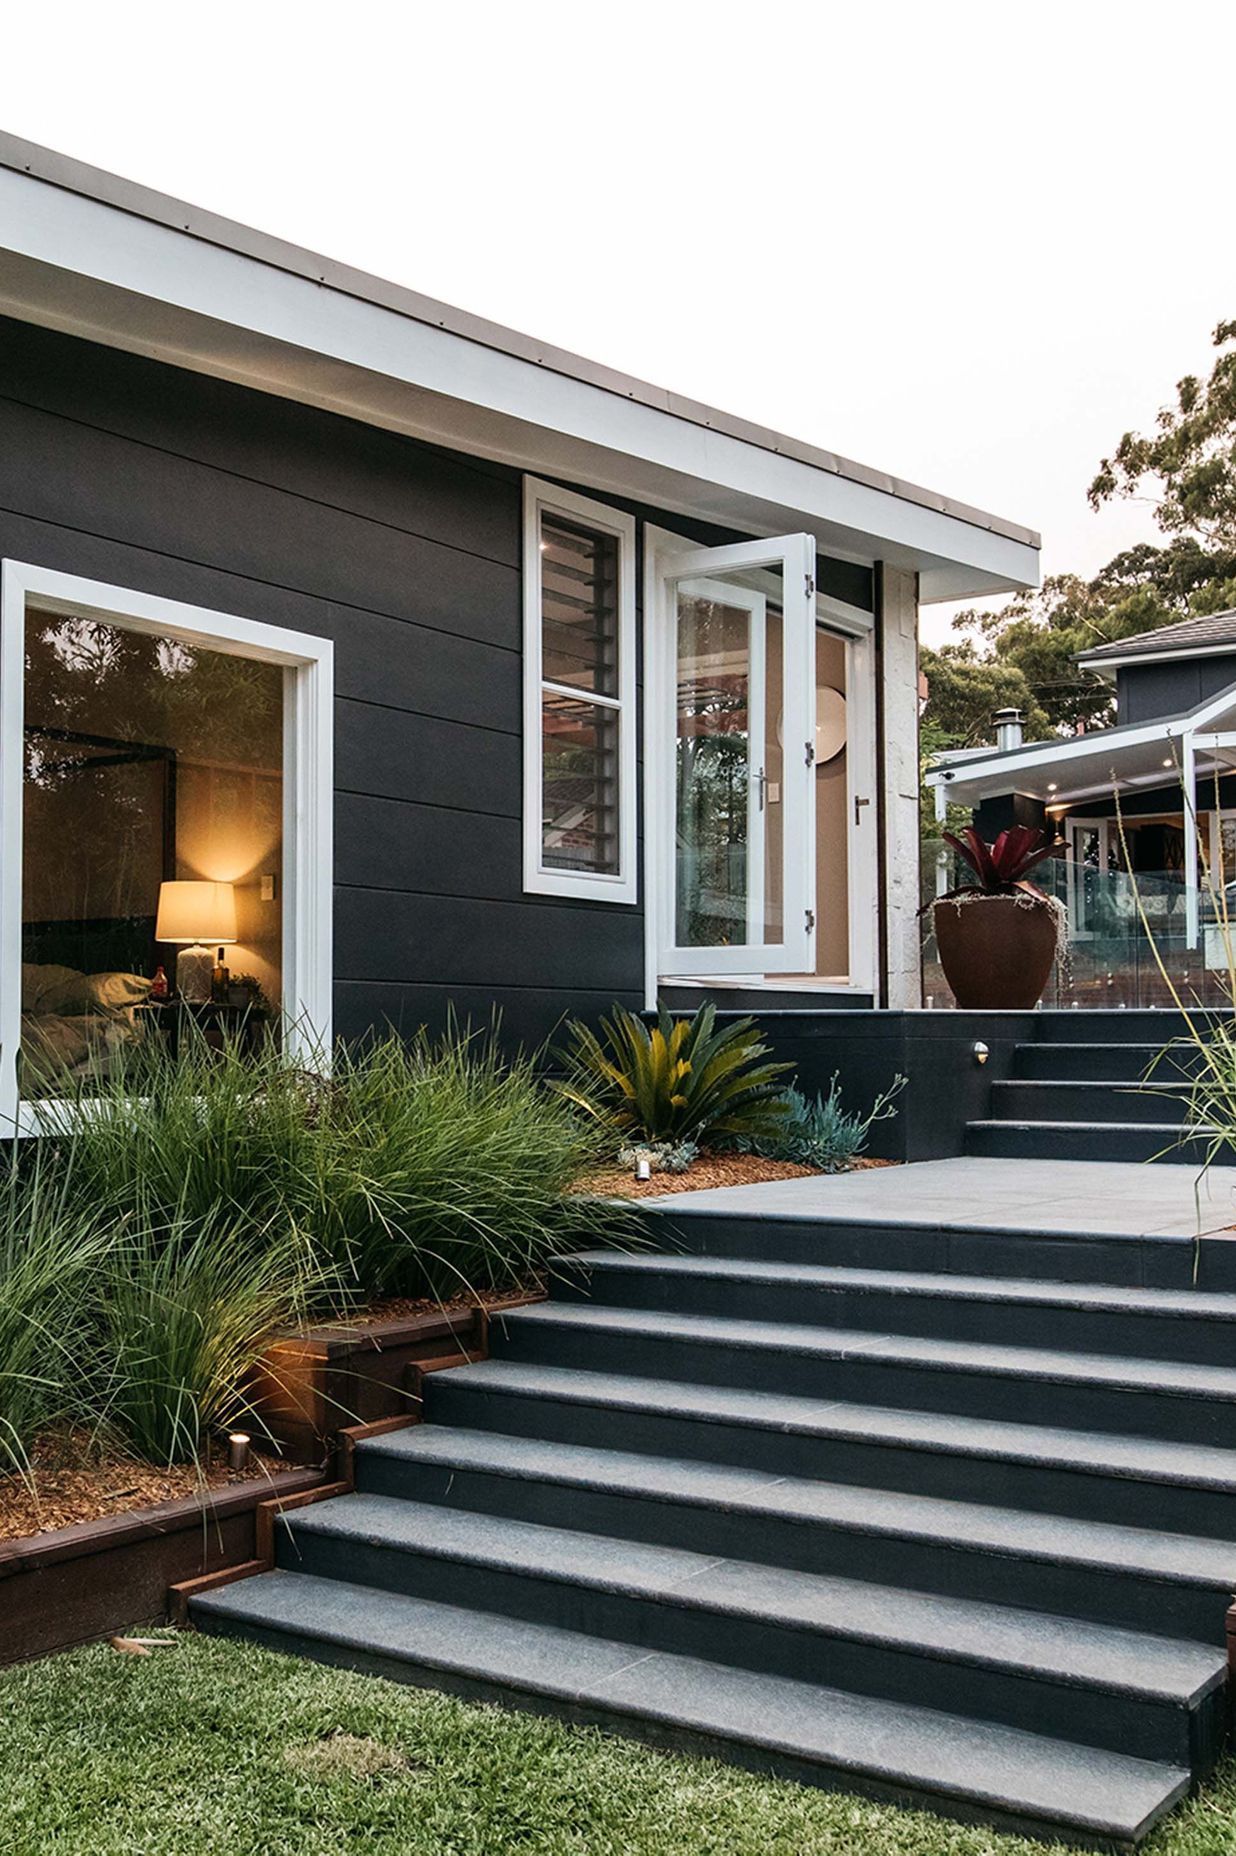 What’s Your Home’s Exterior Design Style?